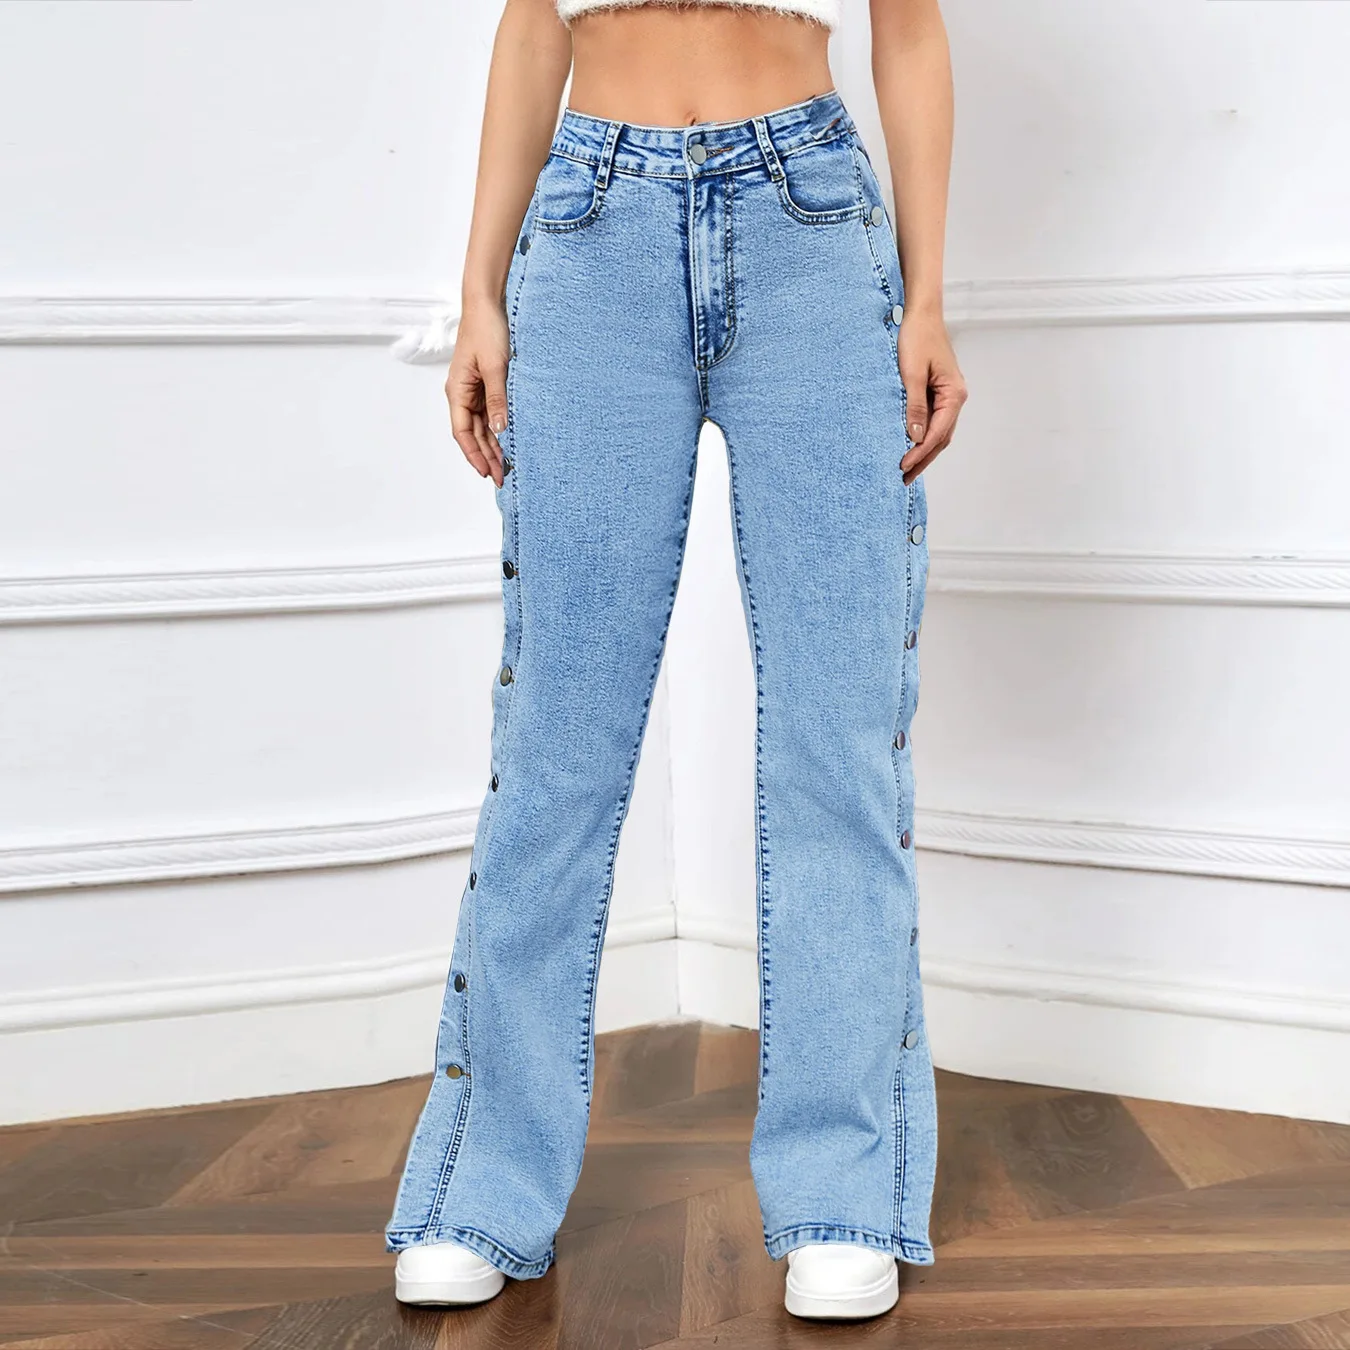 Fashion Streetwear Blue Jeans for Women Slit Side Row Buckle Decoration Slim Straight Pants Female Vintage Casual Denim Trousers fashion big broken holes chain splicing decoration straight jeans women new centre hollow out denim pants female casual trousers